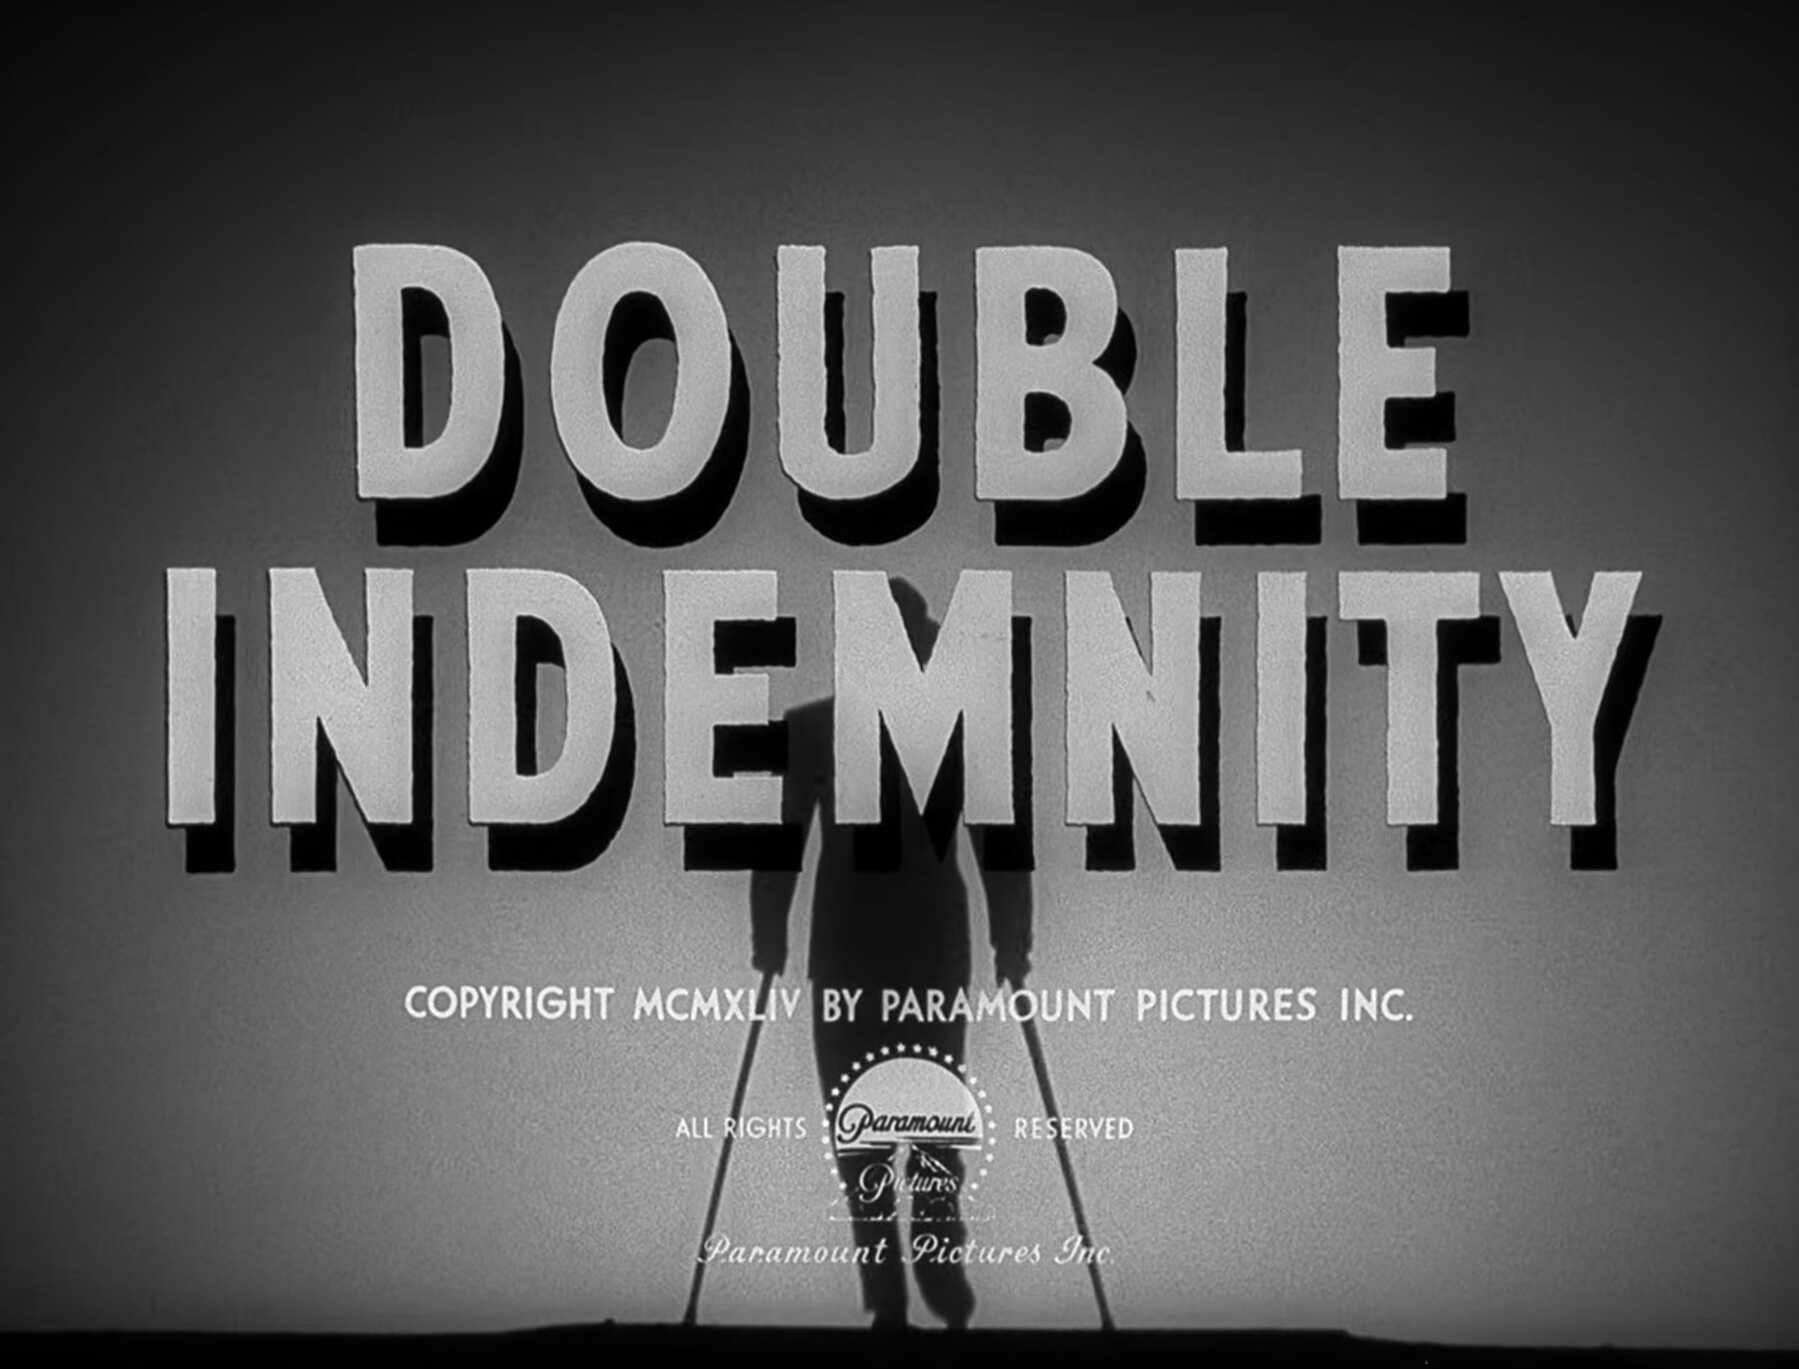 The title card for the film, Double Indemnity.